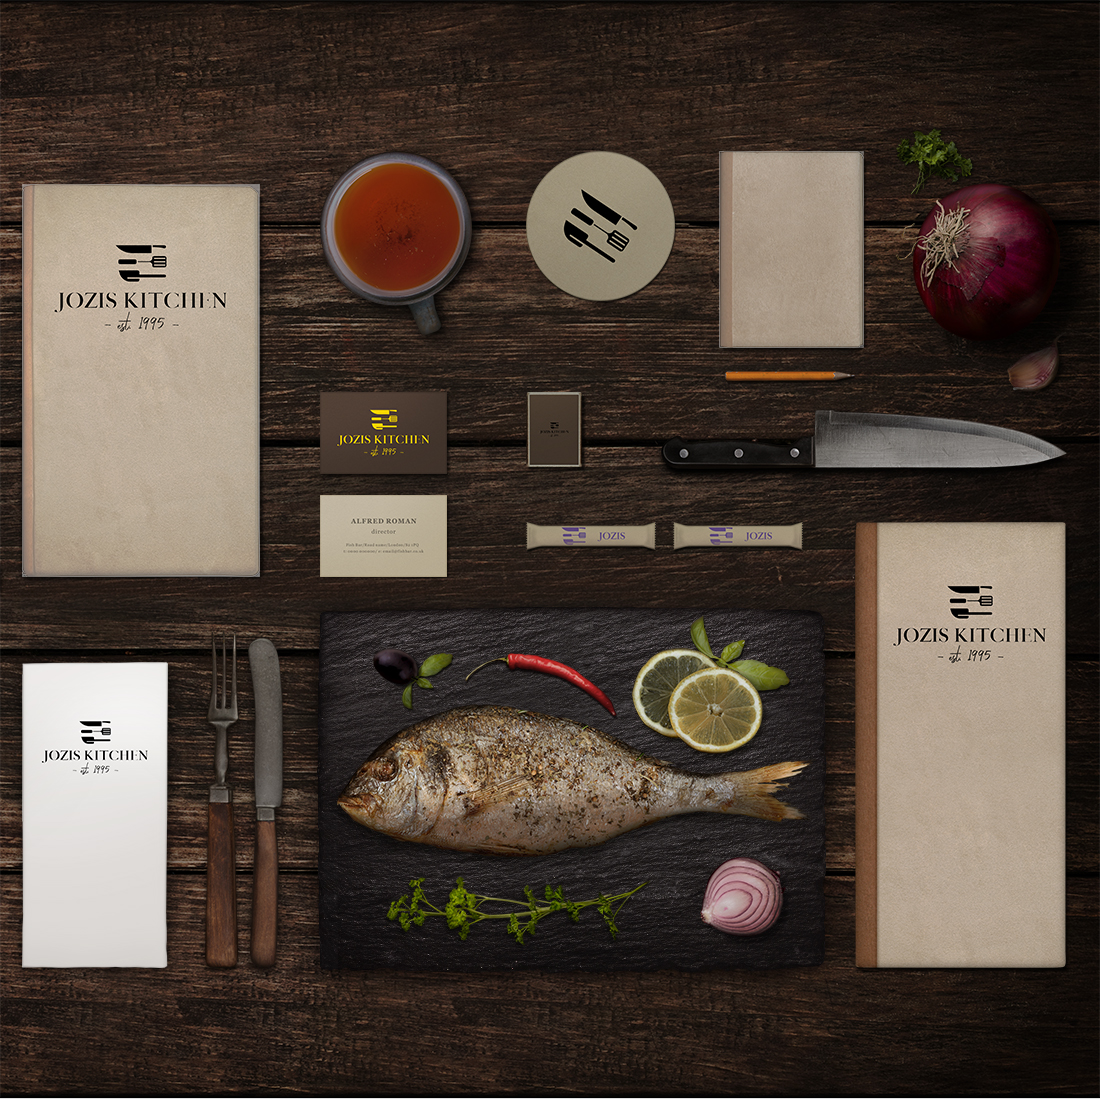 Content Mockup and Graphic Design for Jozi's Kitchen